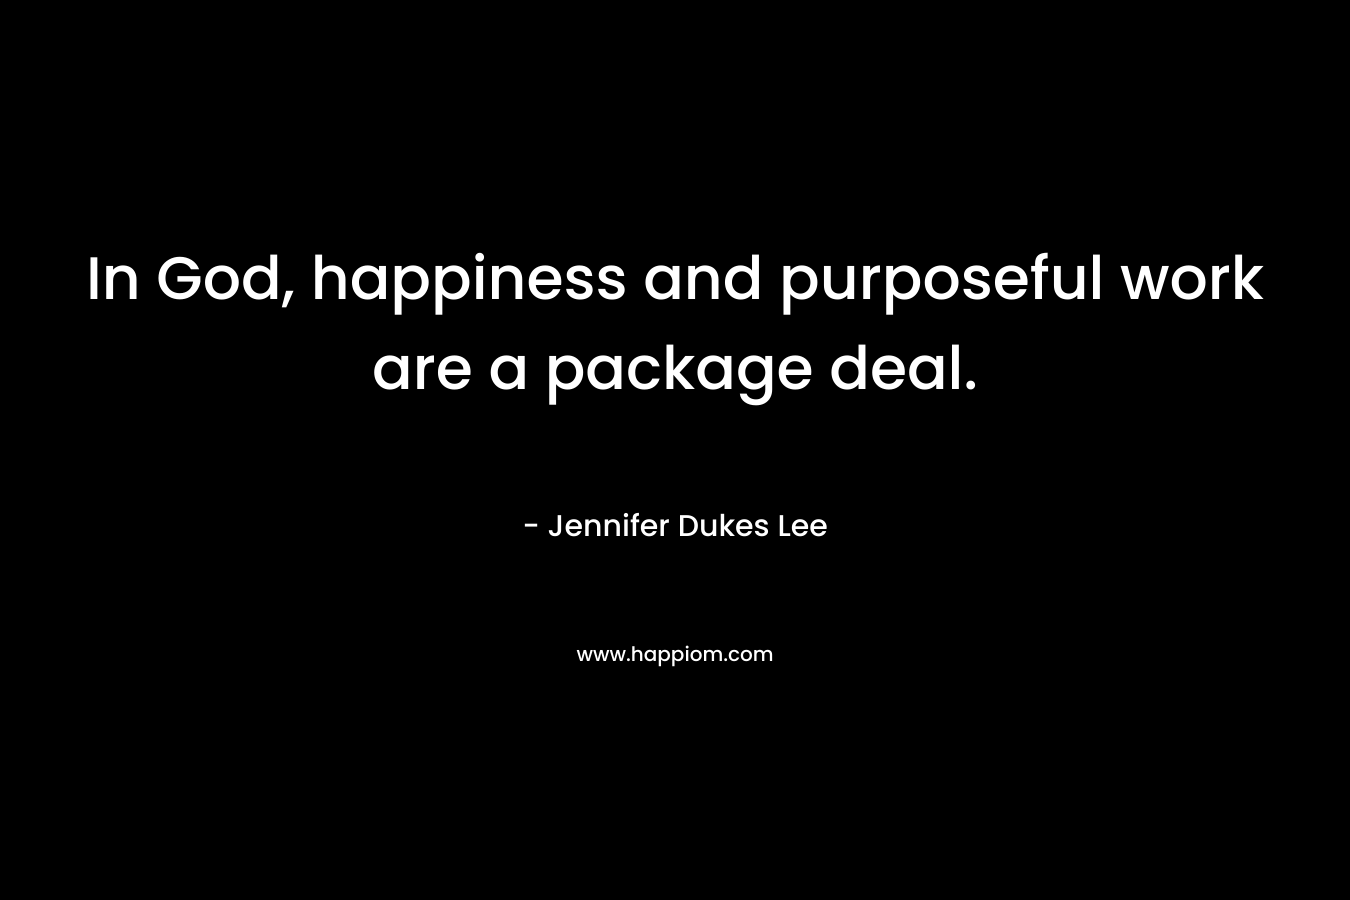 In God, happiness and purposeful work are a package deal. – Jennifer Dukes Lee